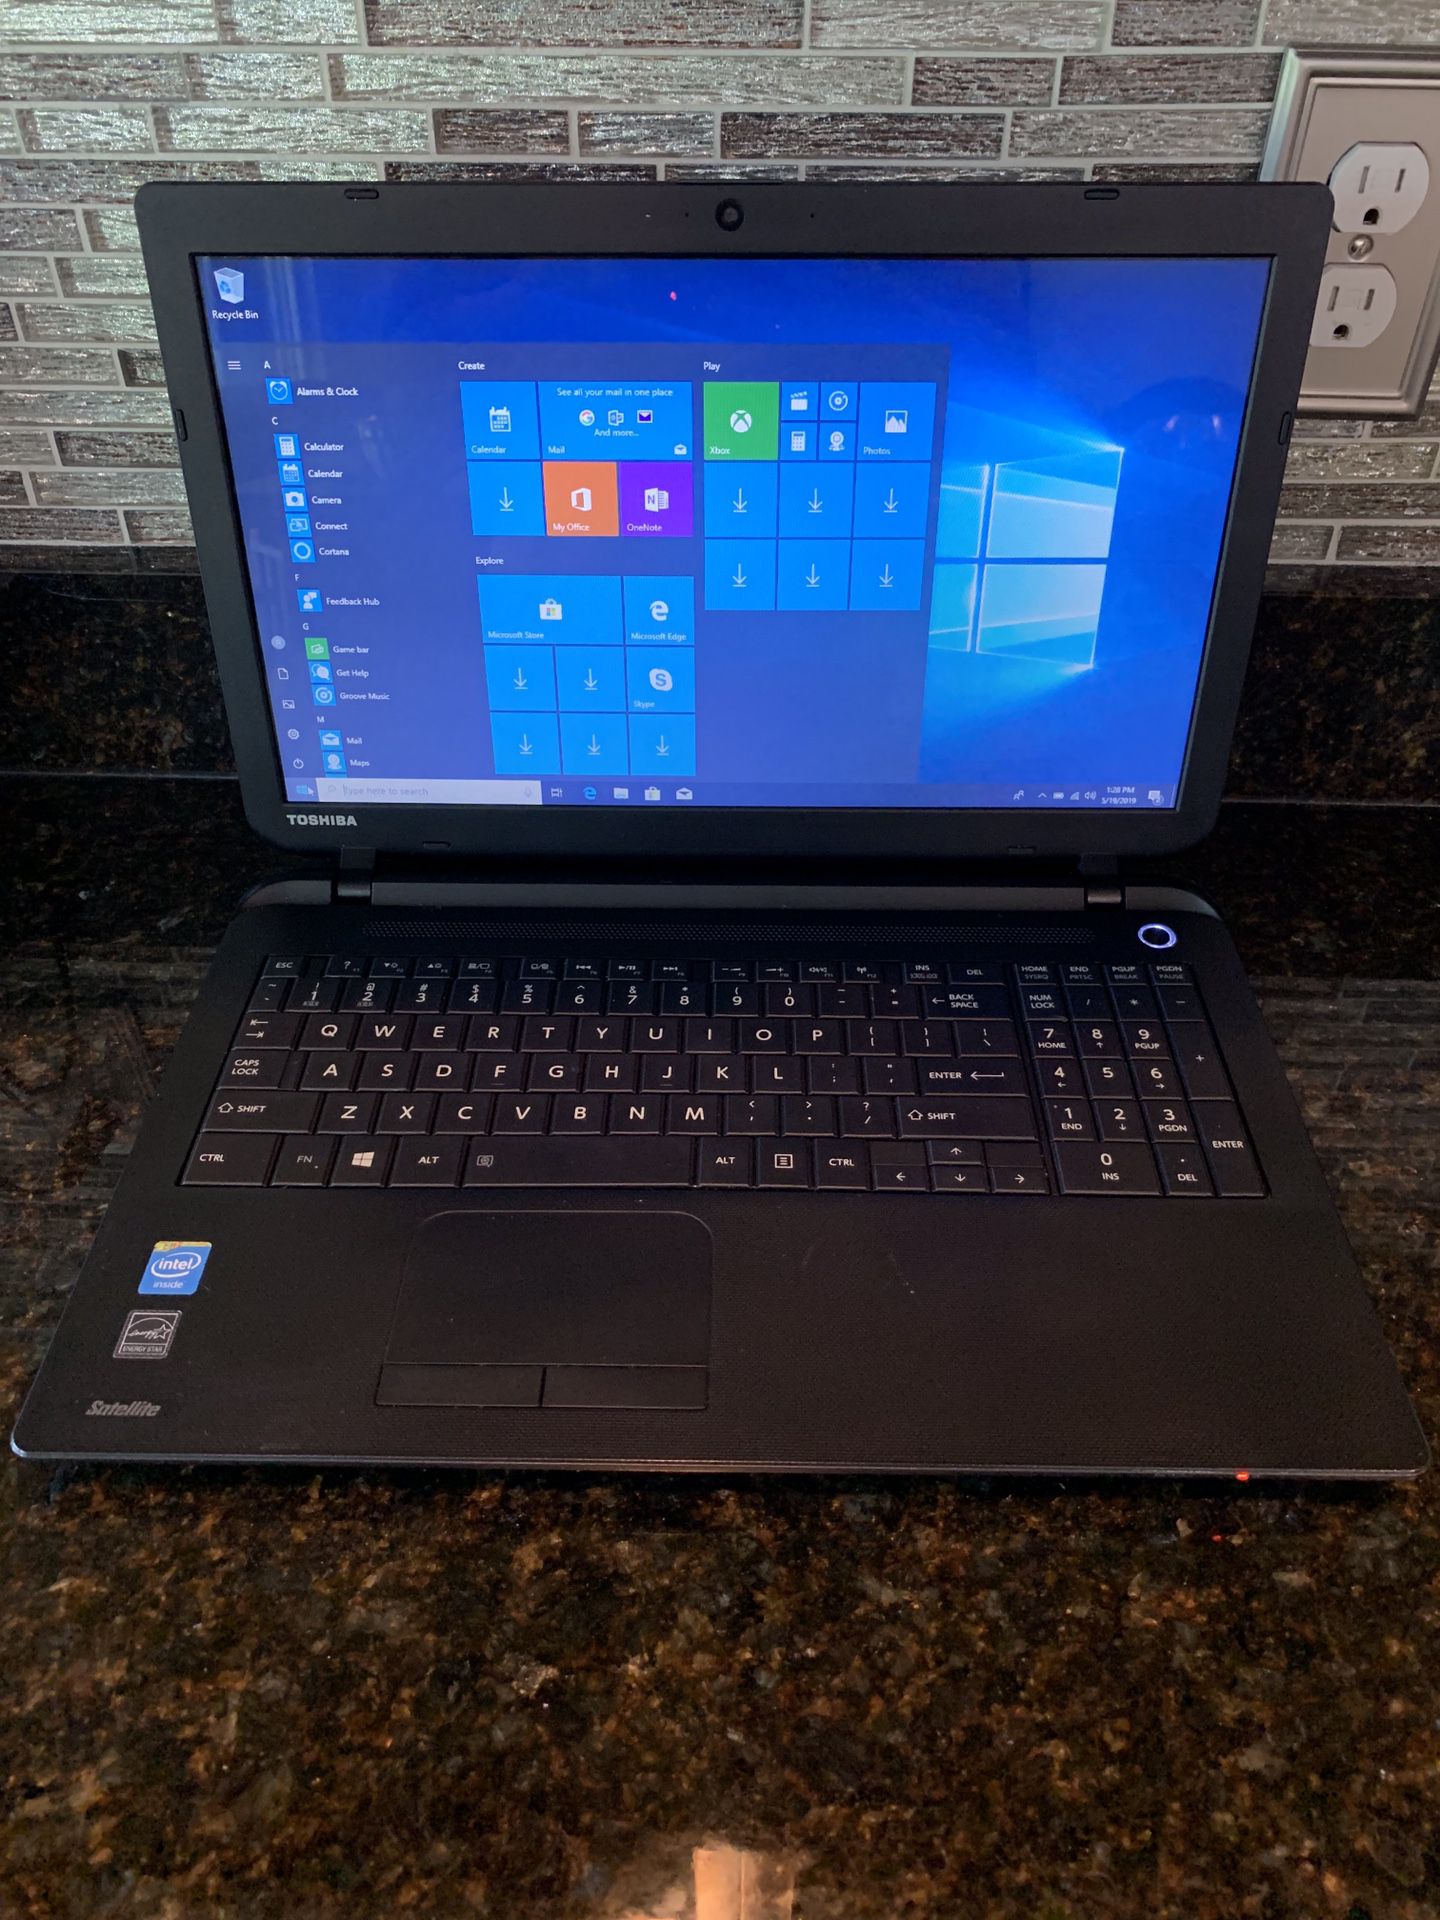 15.6” Toshiba Satellite C55 Laptop with HDMI, Webcam, Windows 10 and Microsoft Office